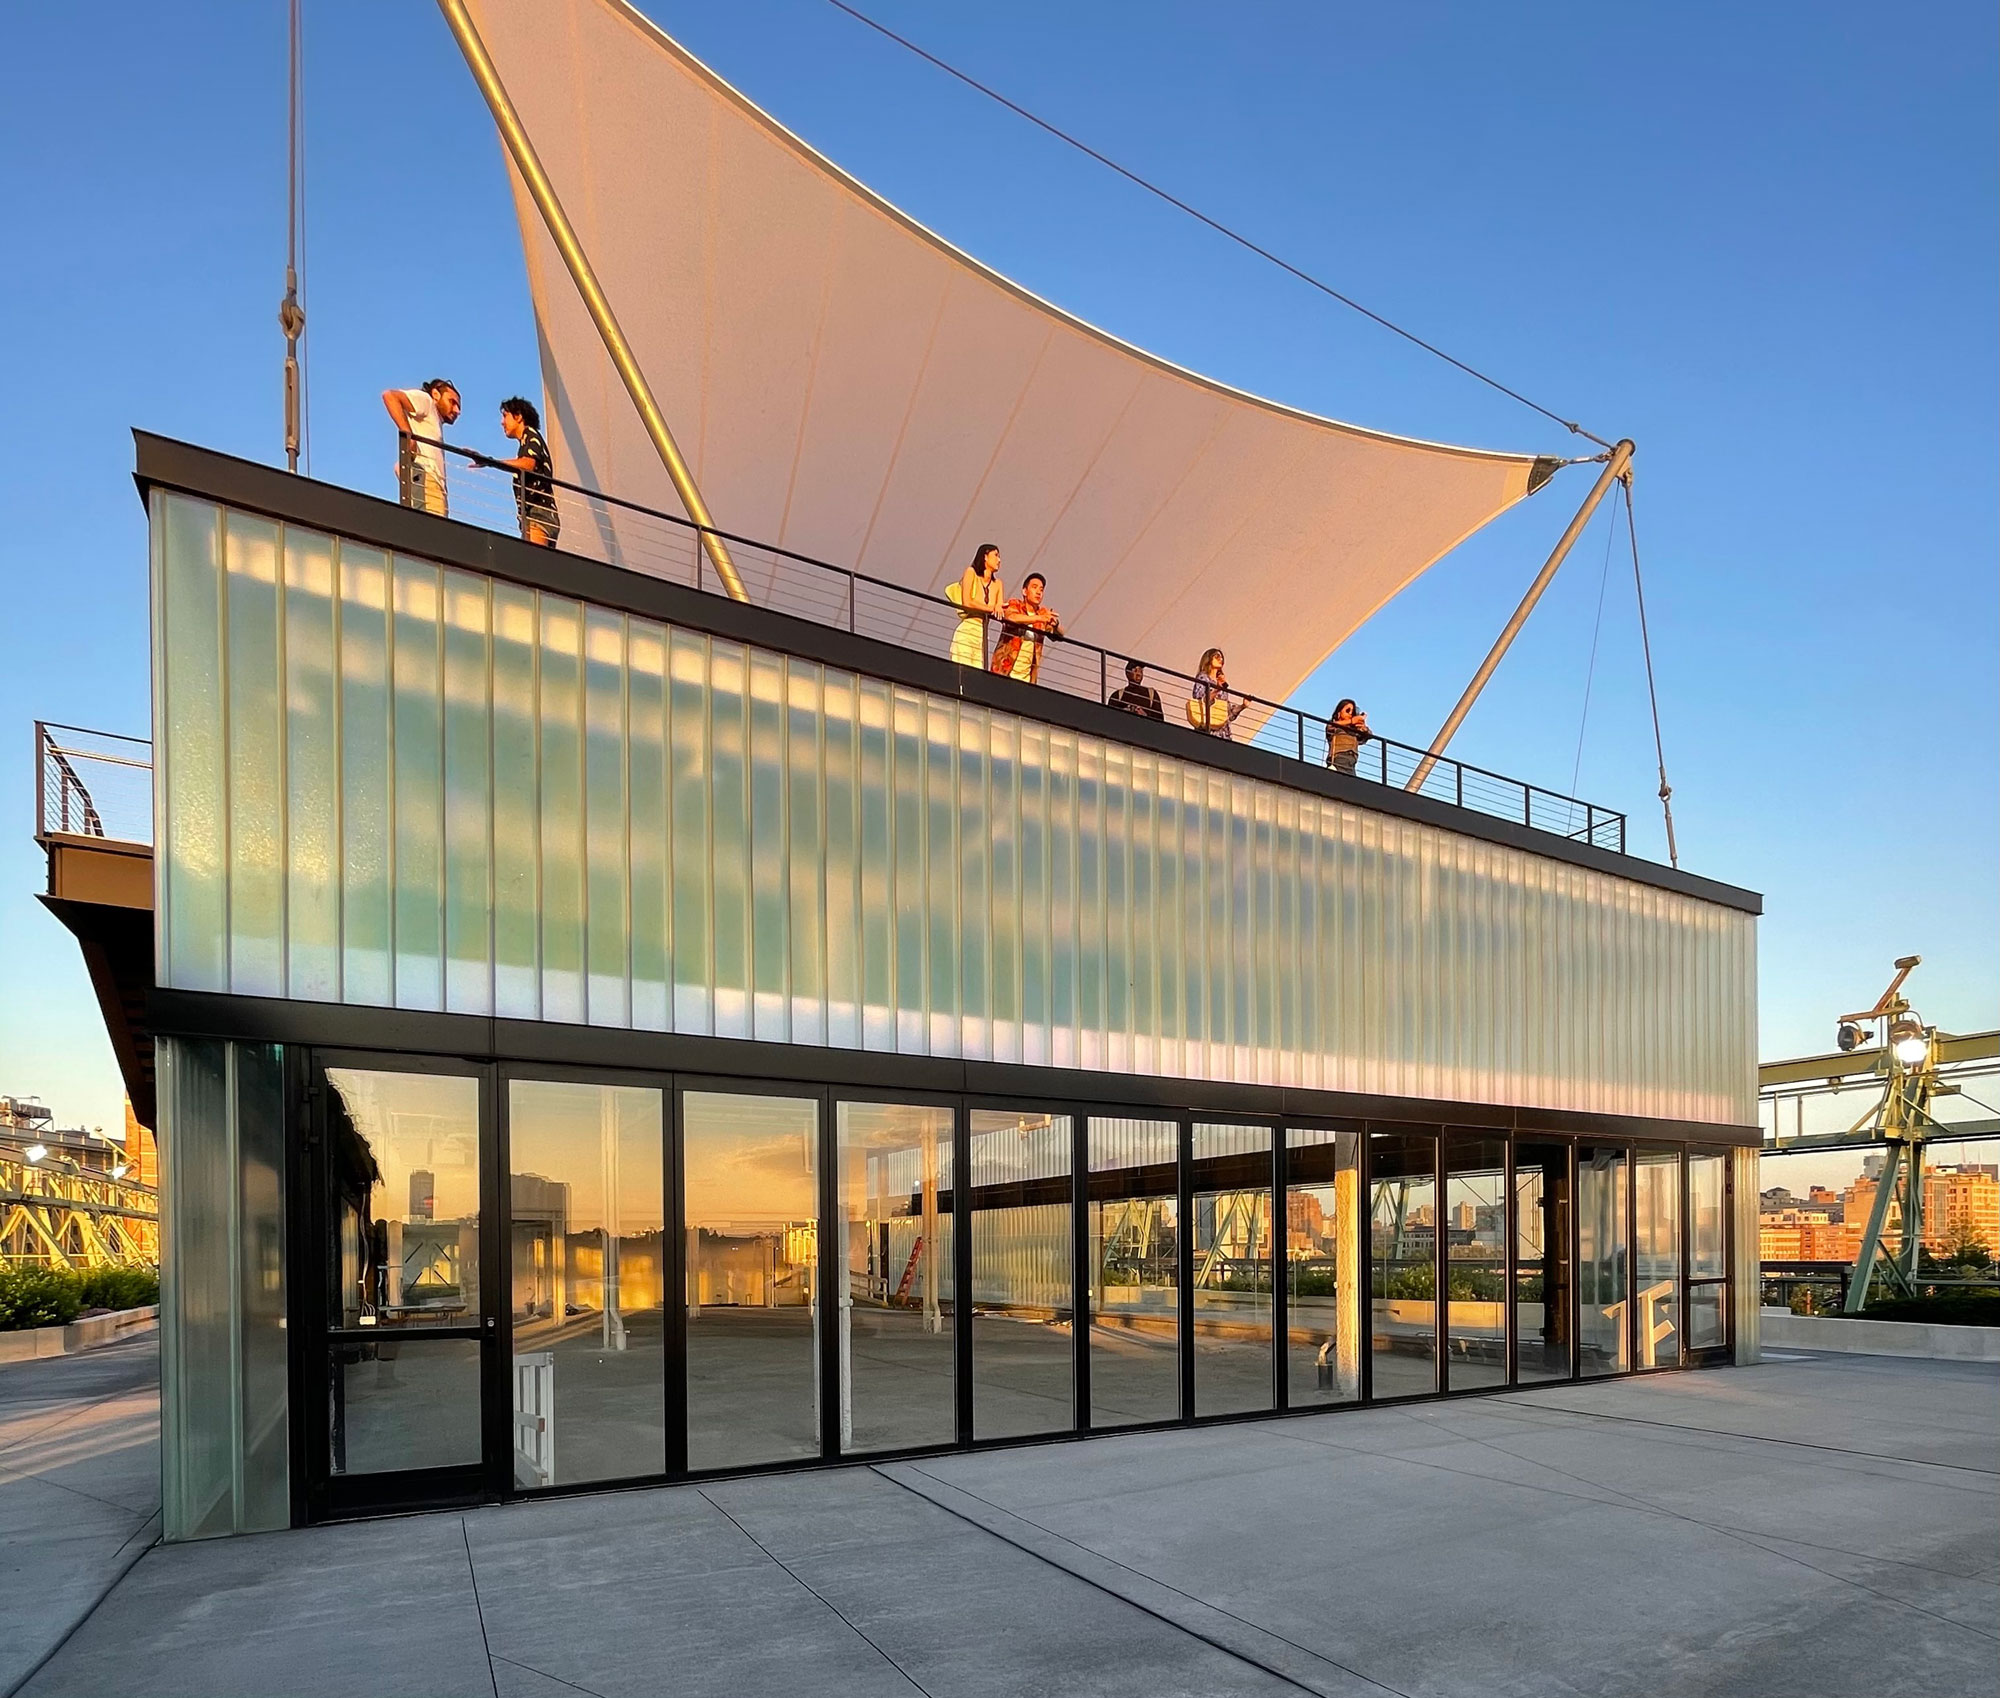 Channel glass facade at Pier 57 with people standing at the railing.